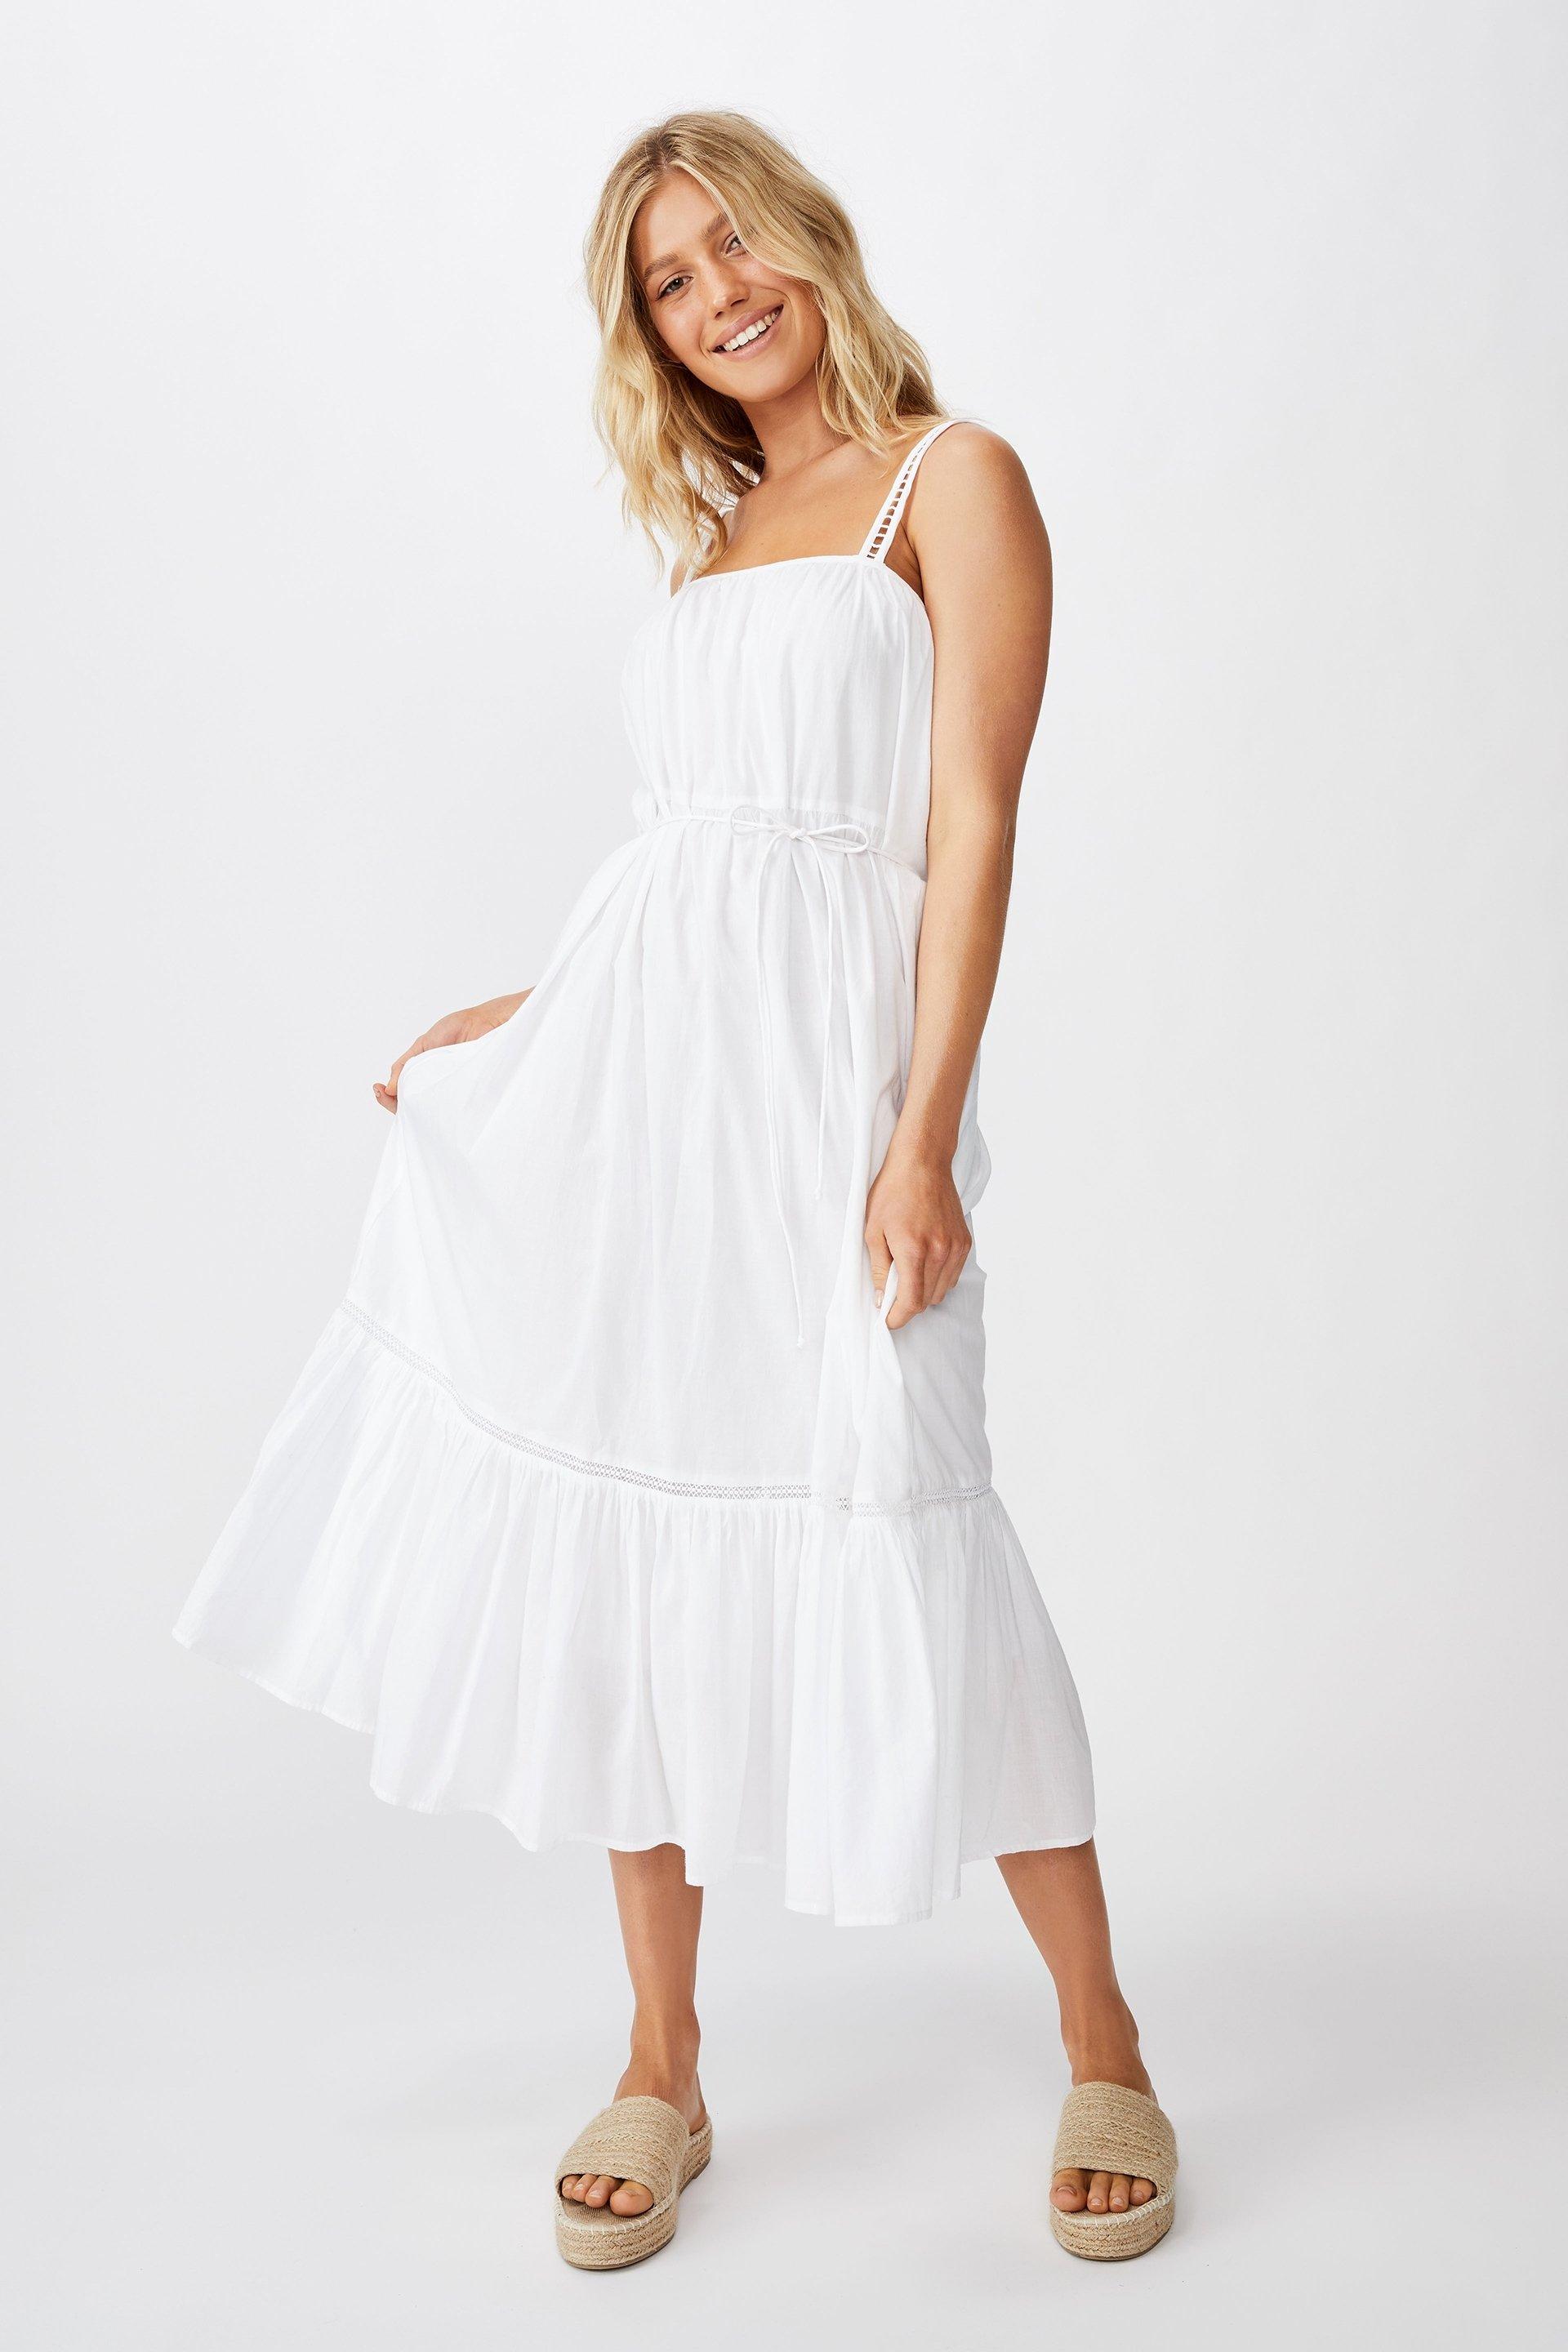 Woven meadow tiered midi dress - white Cotton On Casual | Superbalist.com